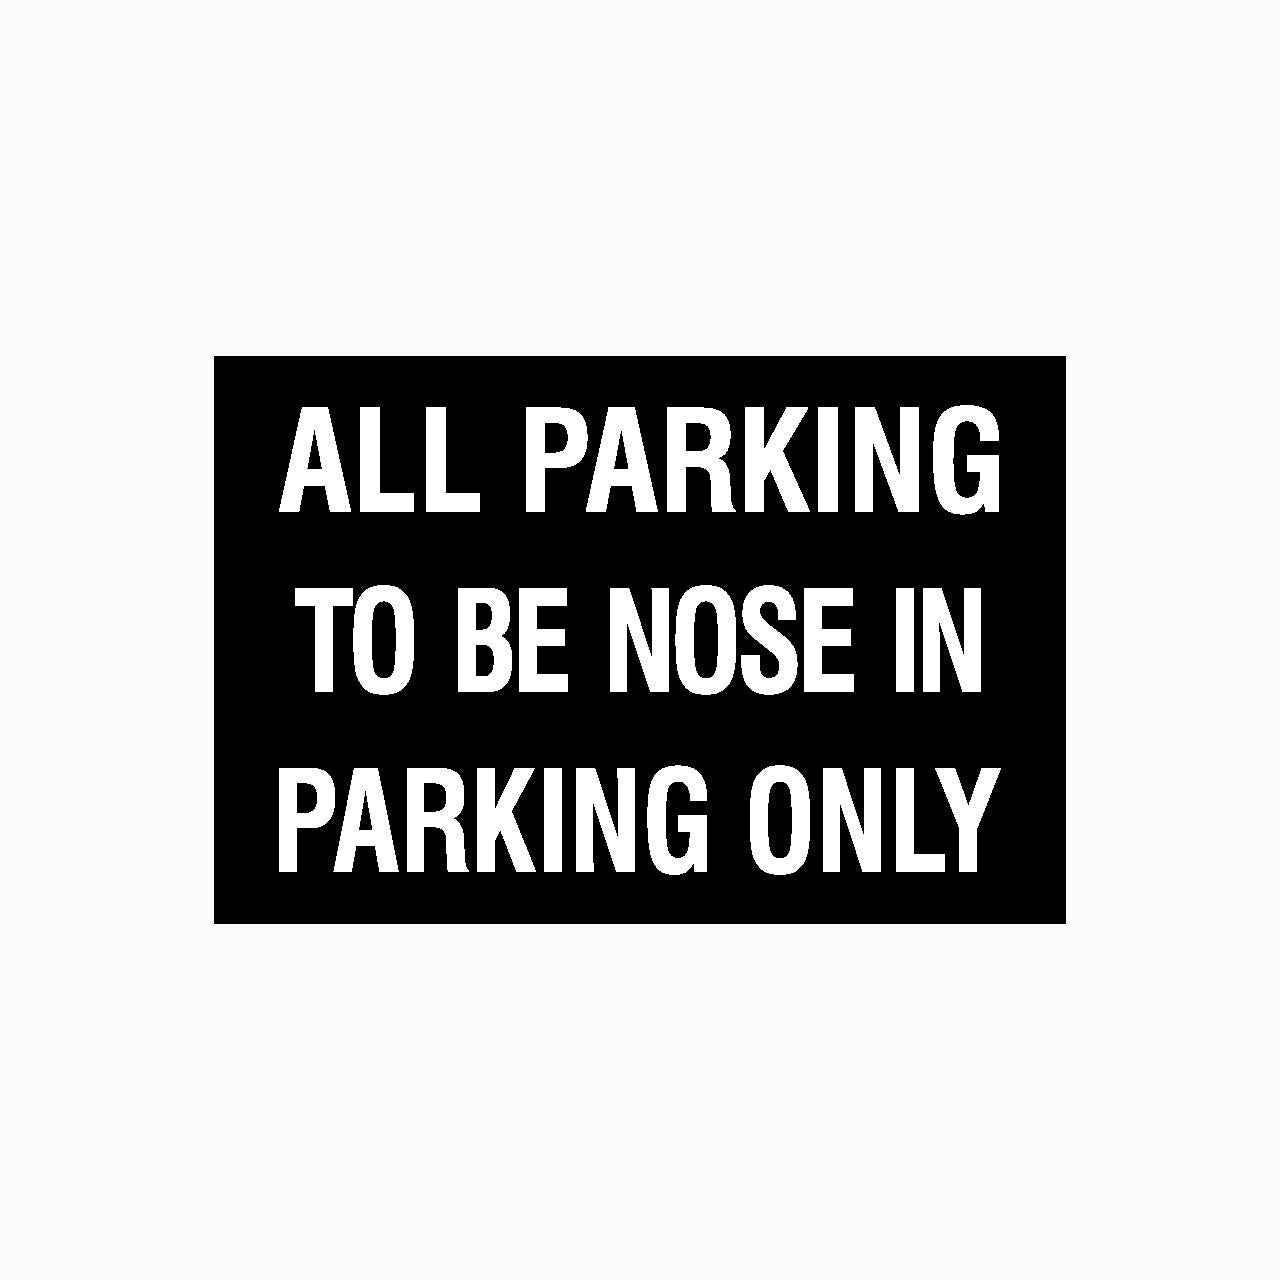 ALL PARKING TO BE NOSE IN PARKING ONLY SIGN